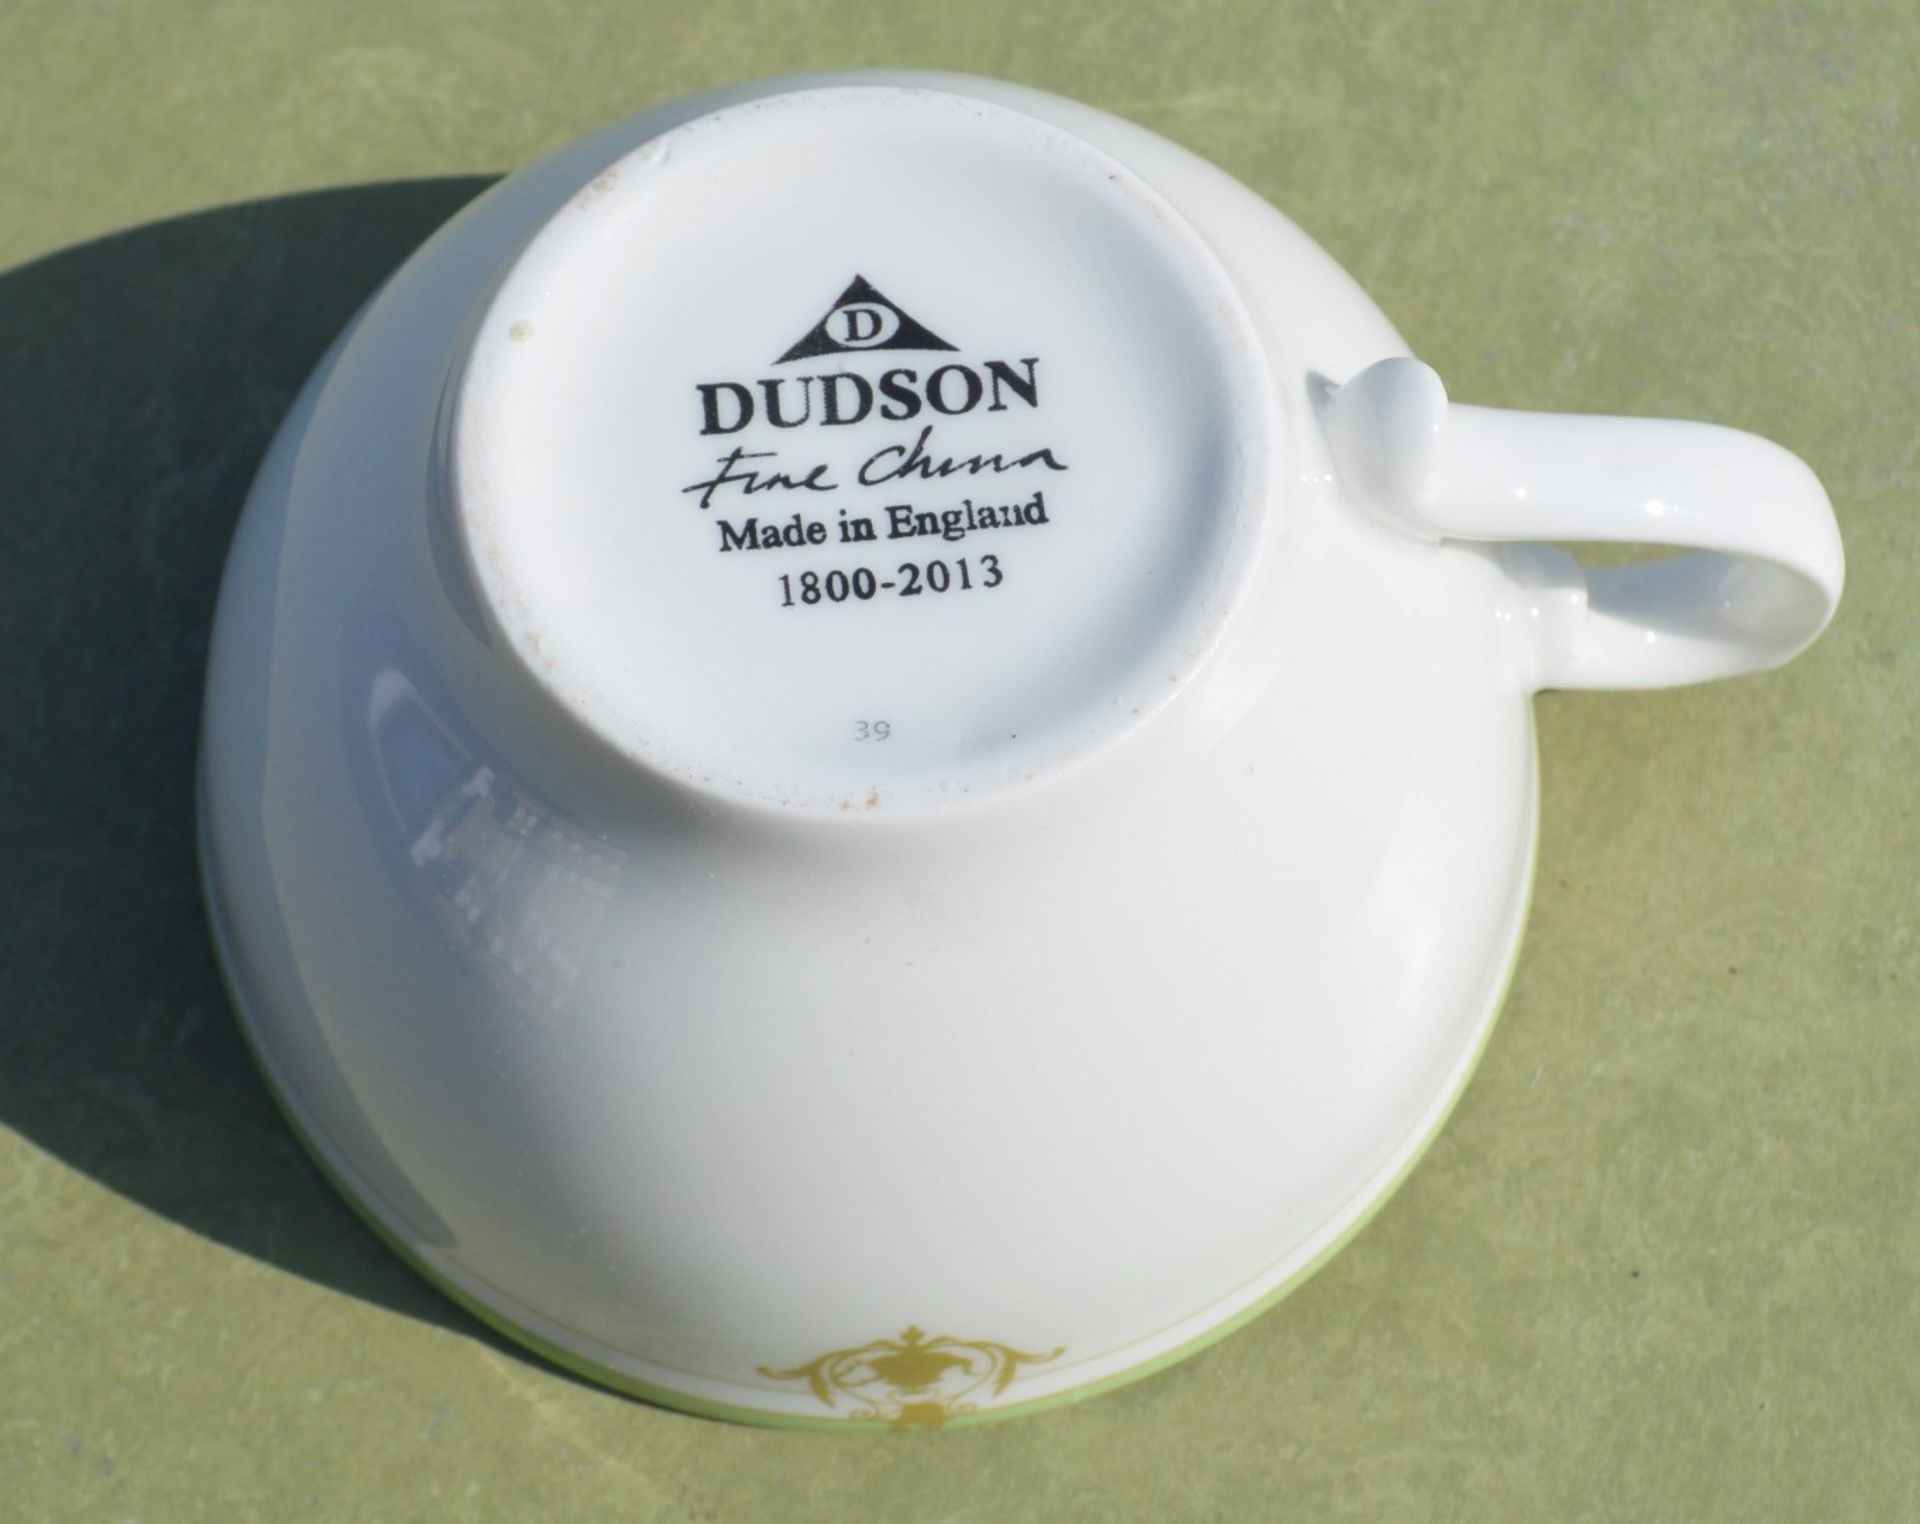 35 x DUDSON Fine China 'Georgian' Low Tea Cups With With Saucers All Featuring 'Famous Branding' - - Image 7 of 8